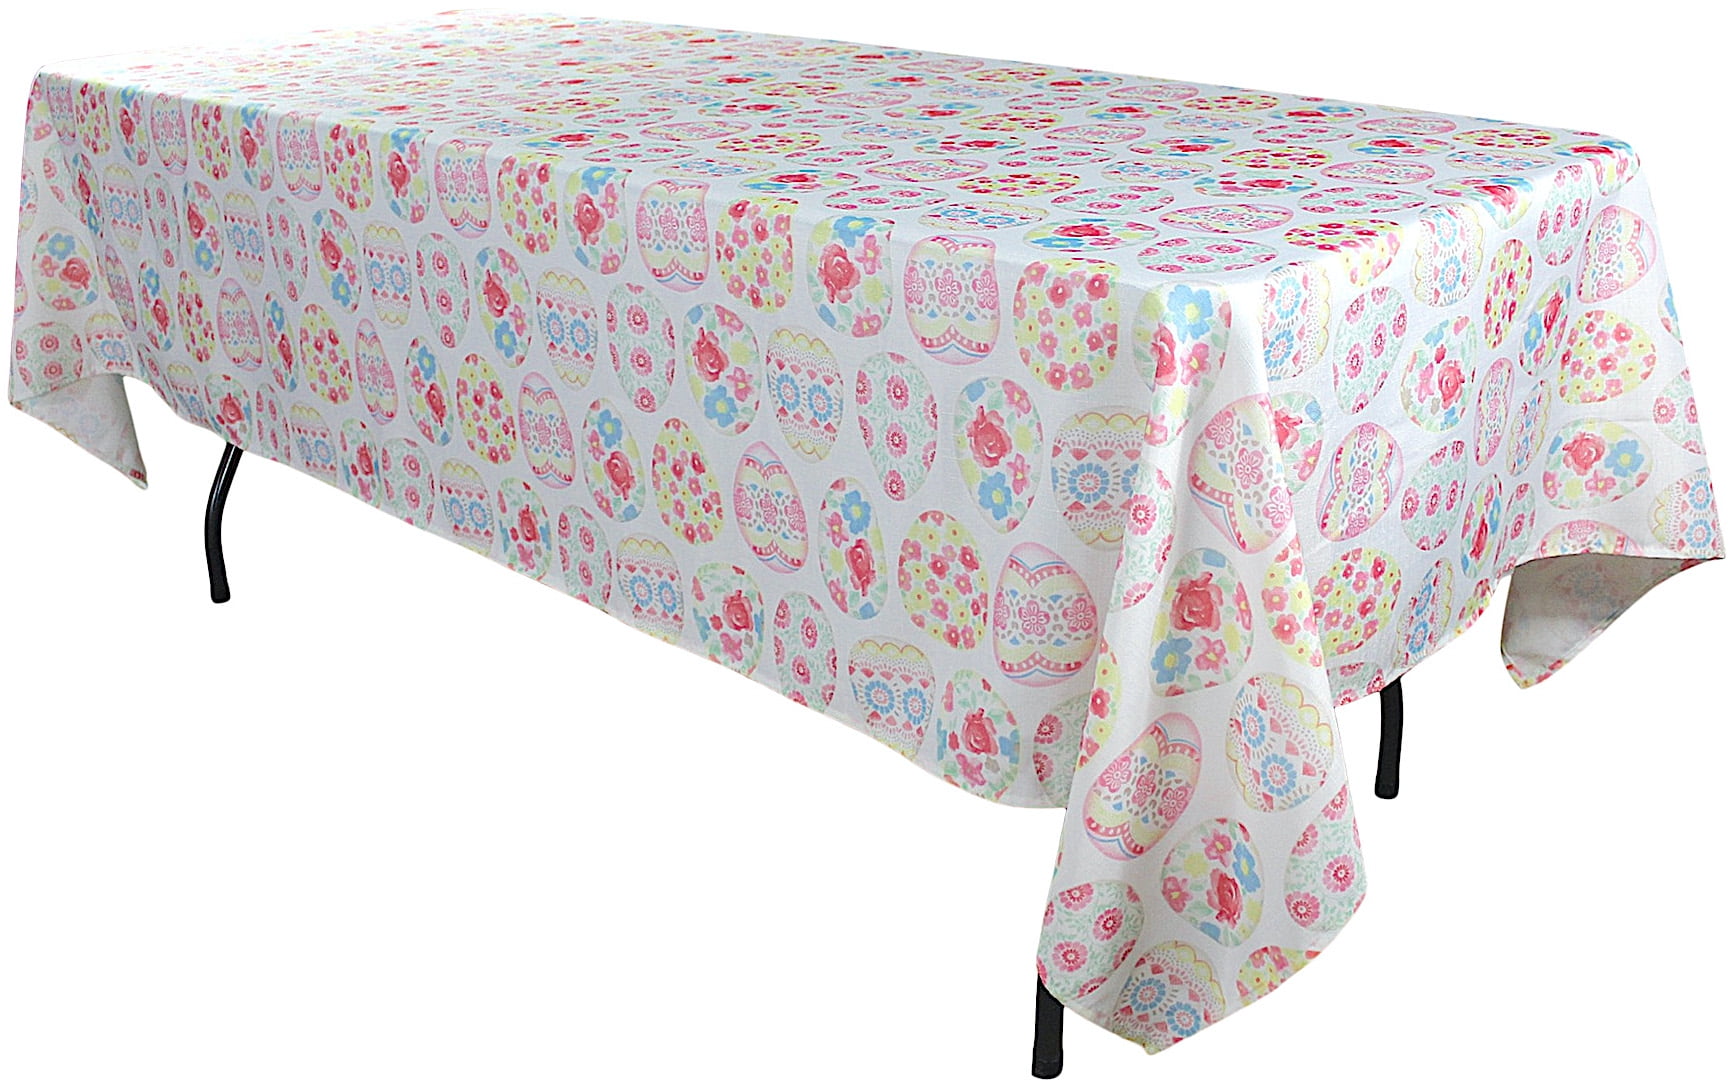 Decorative Easter Egg Fabric Tablecloth: Colorful Ornate Spring Flower ...